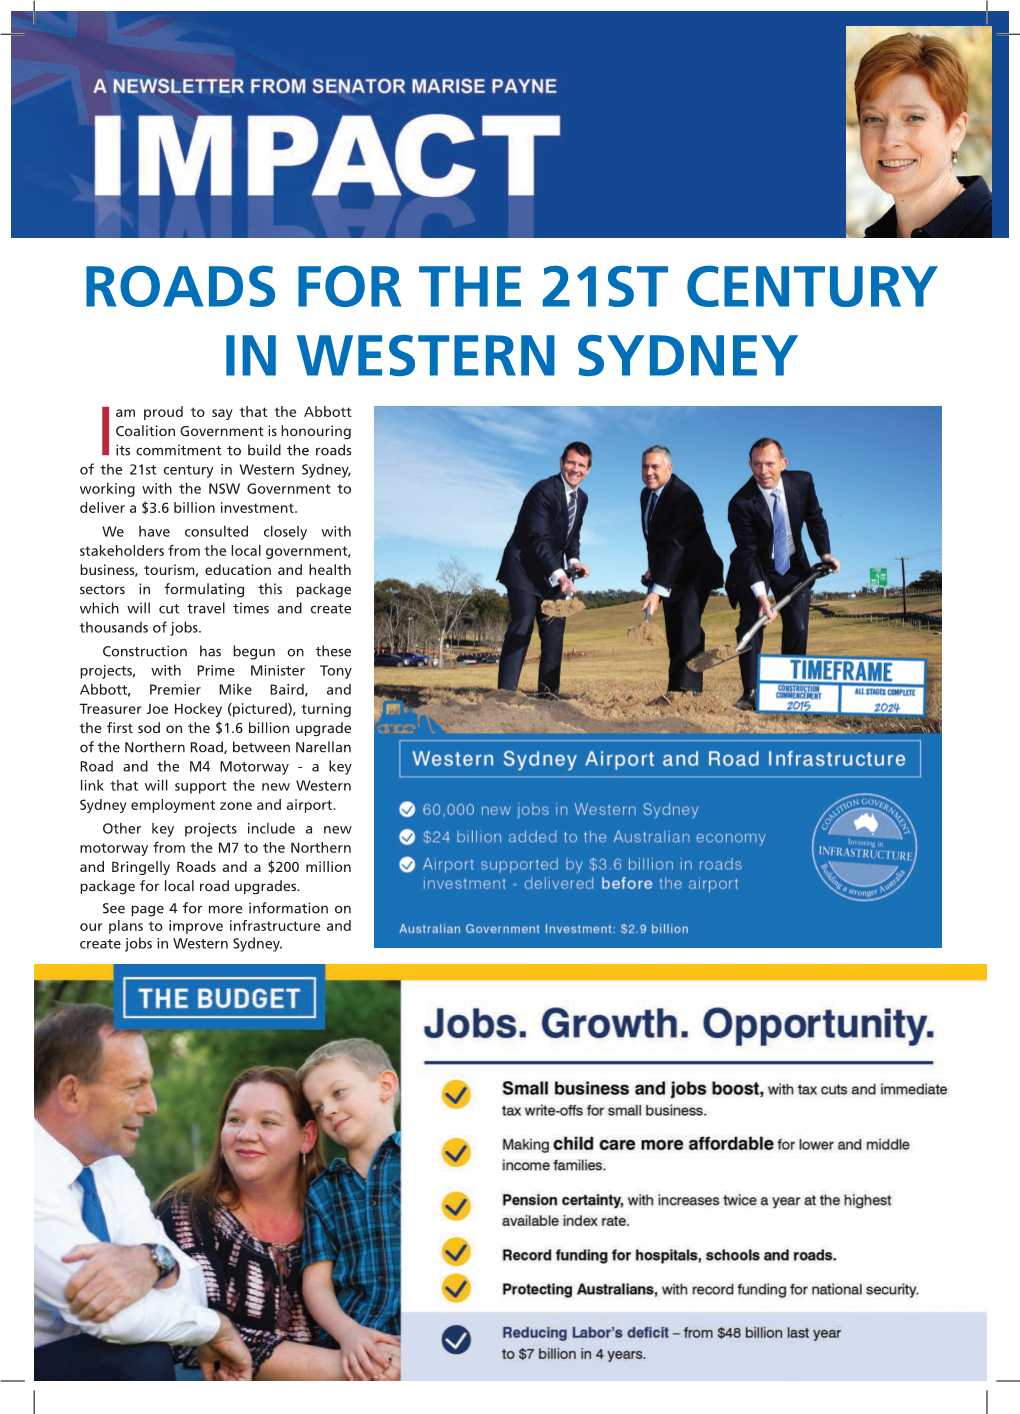 Roads for the 21St Century in Western Sydney